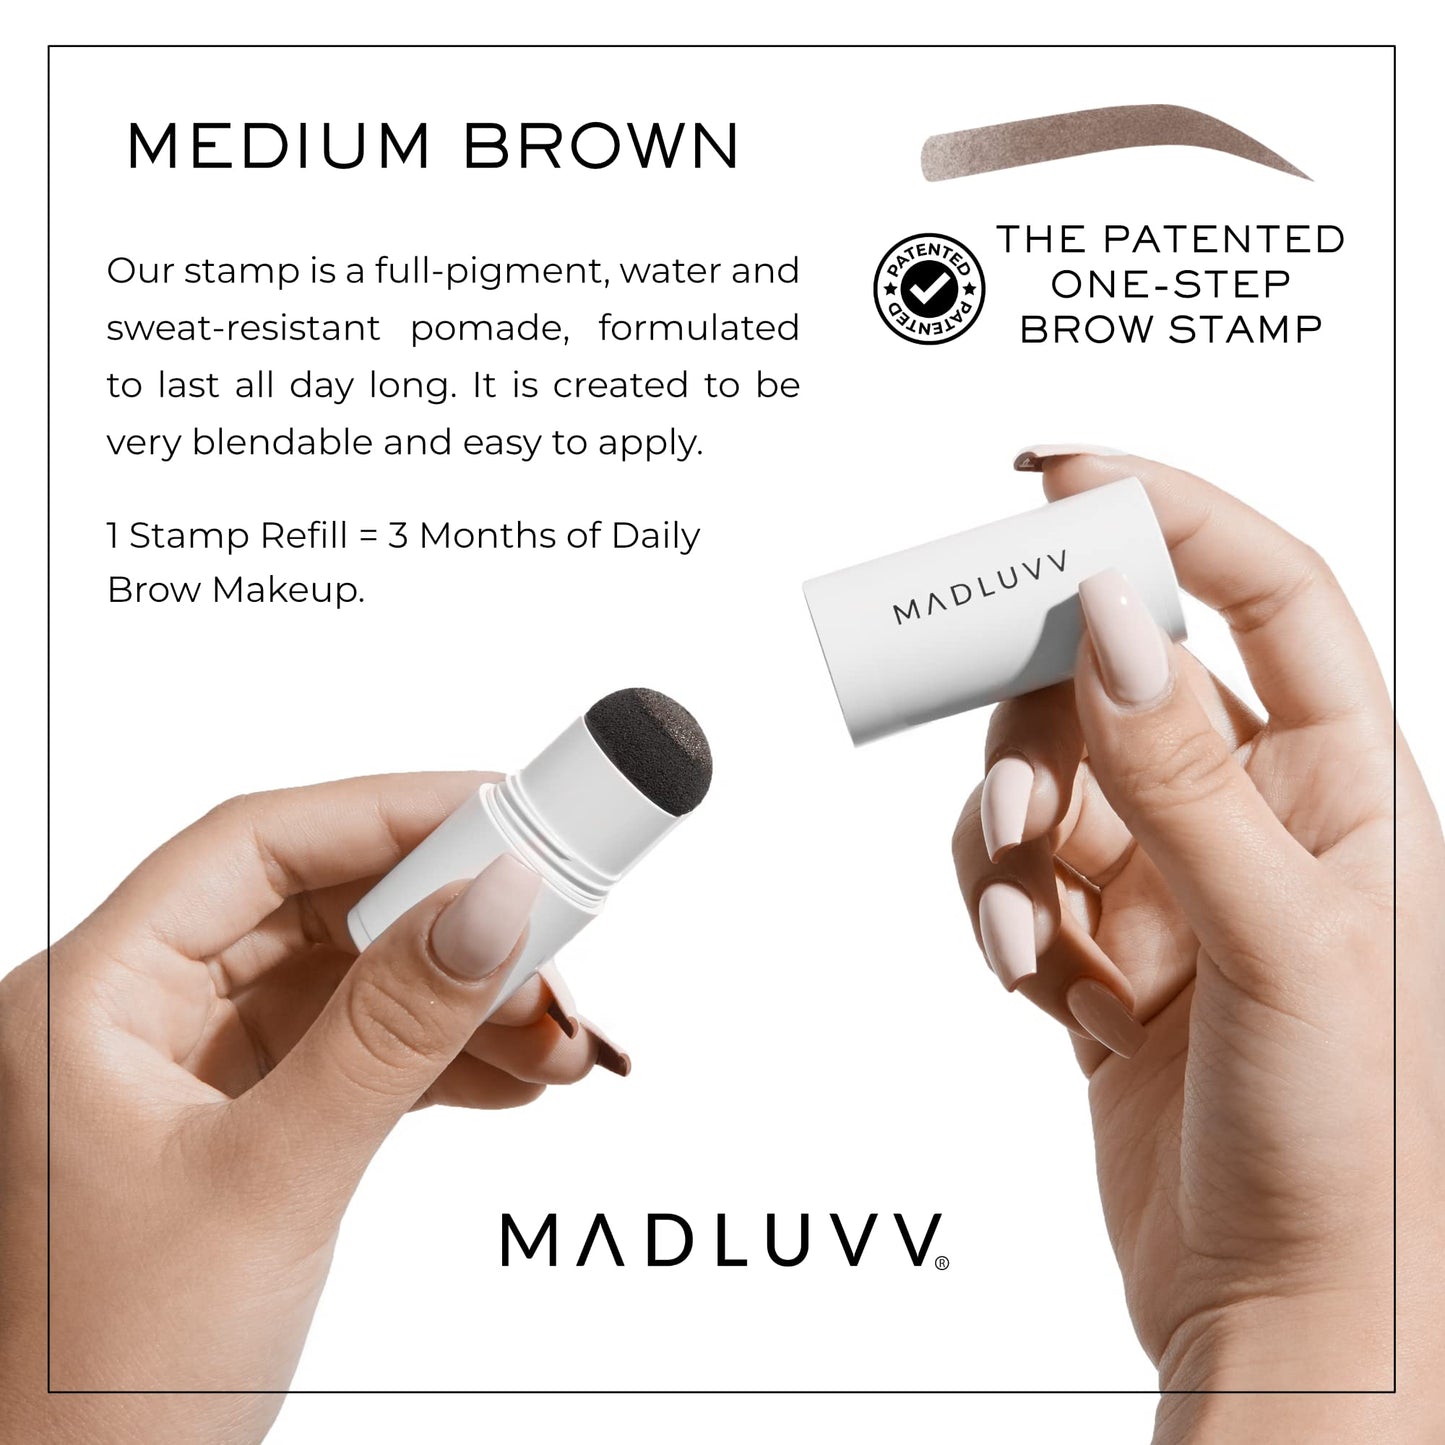 MADLUVV Brow Stamp Refill* - Color Stamp for Brows & Root Touch Up for Women & Men, Instantly Conceal Hair Loss, Grey Hair, Thinning Hair with Stain-Proof/Smudge-Proof Powder Formula (Medium Brown)